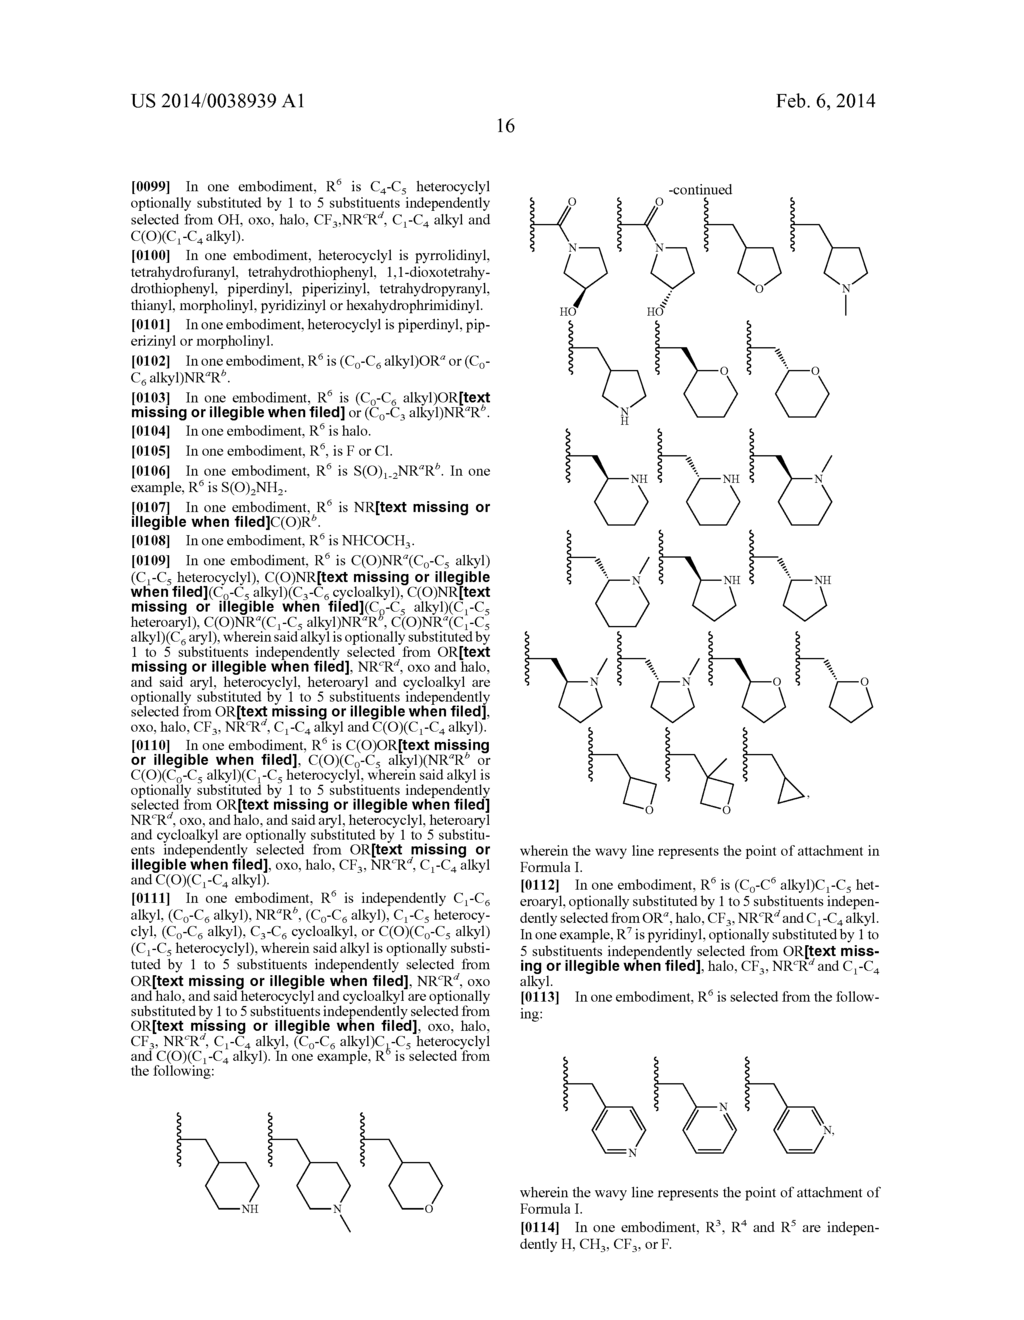 TRIAZOLOPYRIDINE JAK INHIBITOR COMPOUNDS AND METHODS - diagram, schematic, and image 17